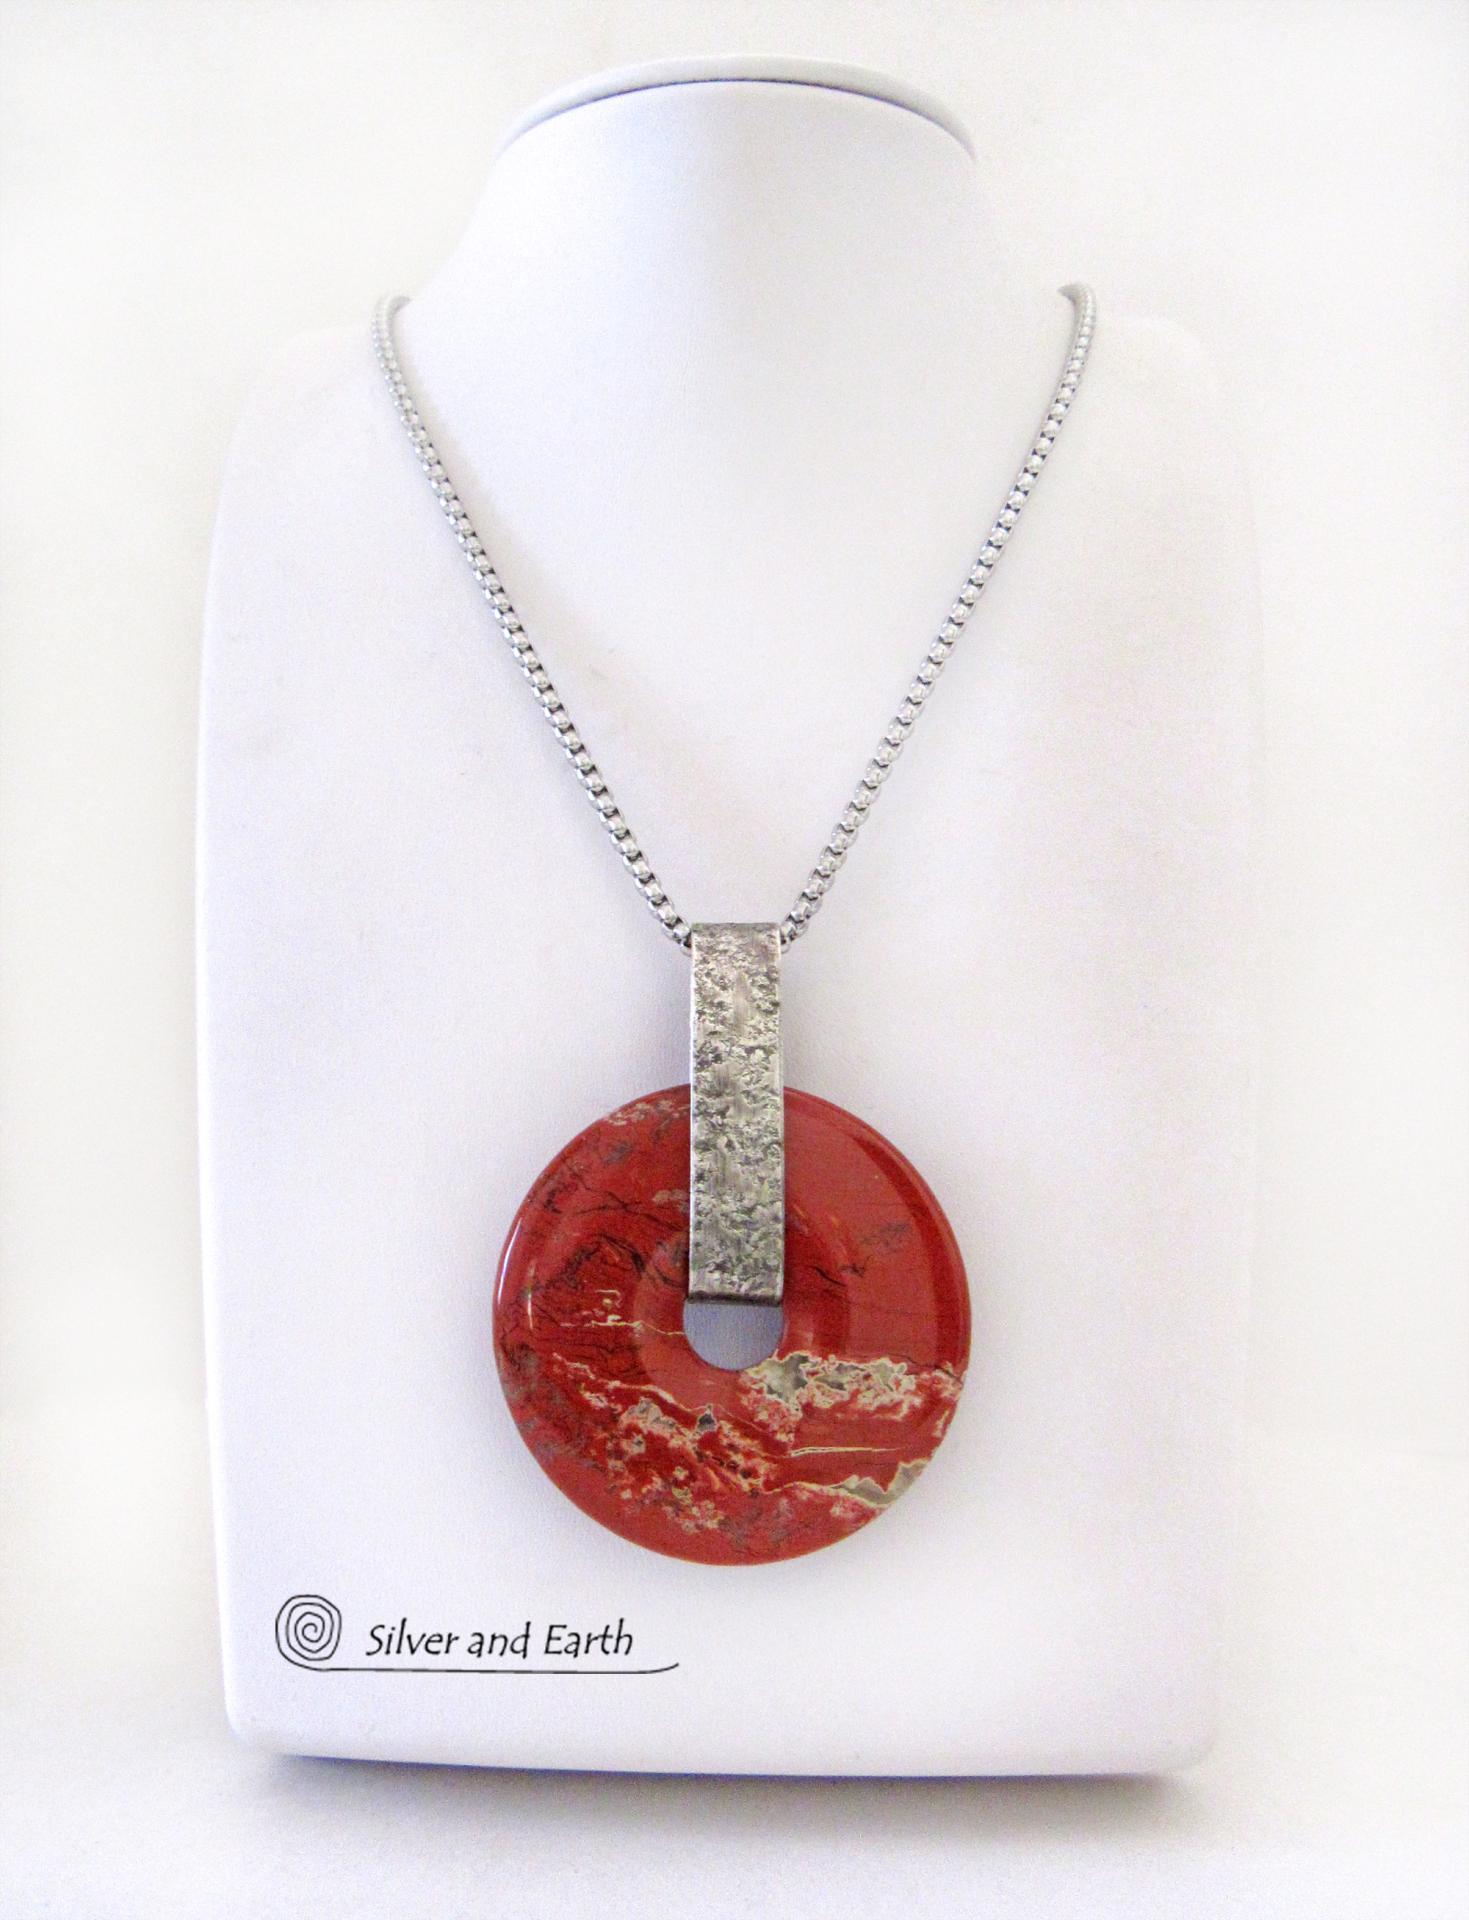 White Lace Red Jasper Sterling Silver Pendant Necklace - One of a Kind Natural Stone Jewelry